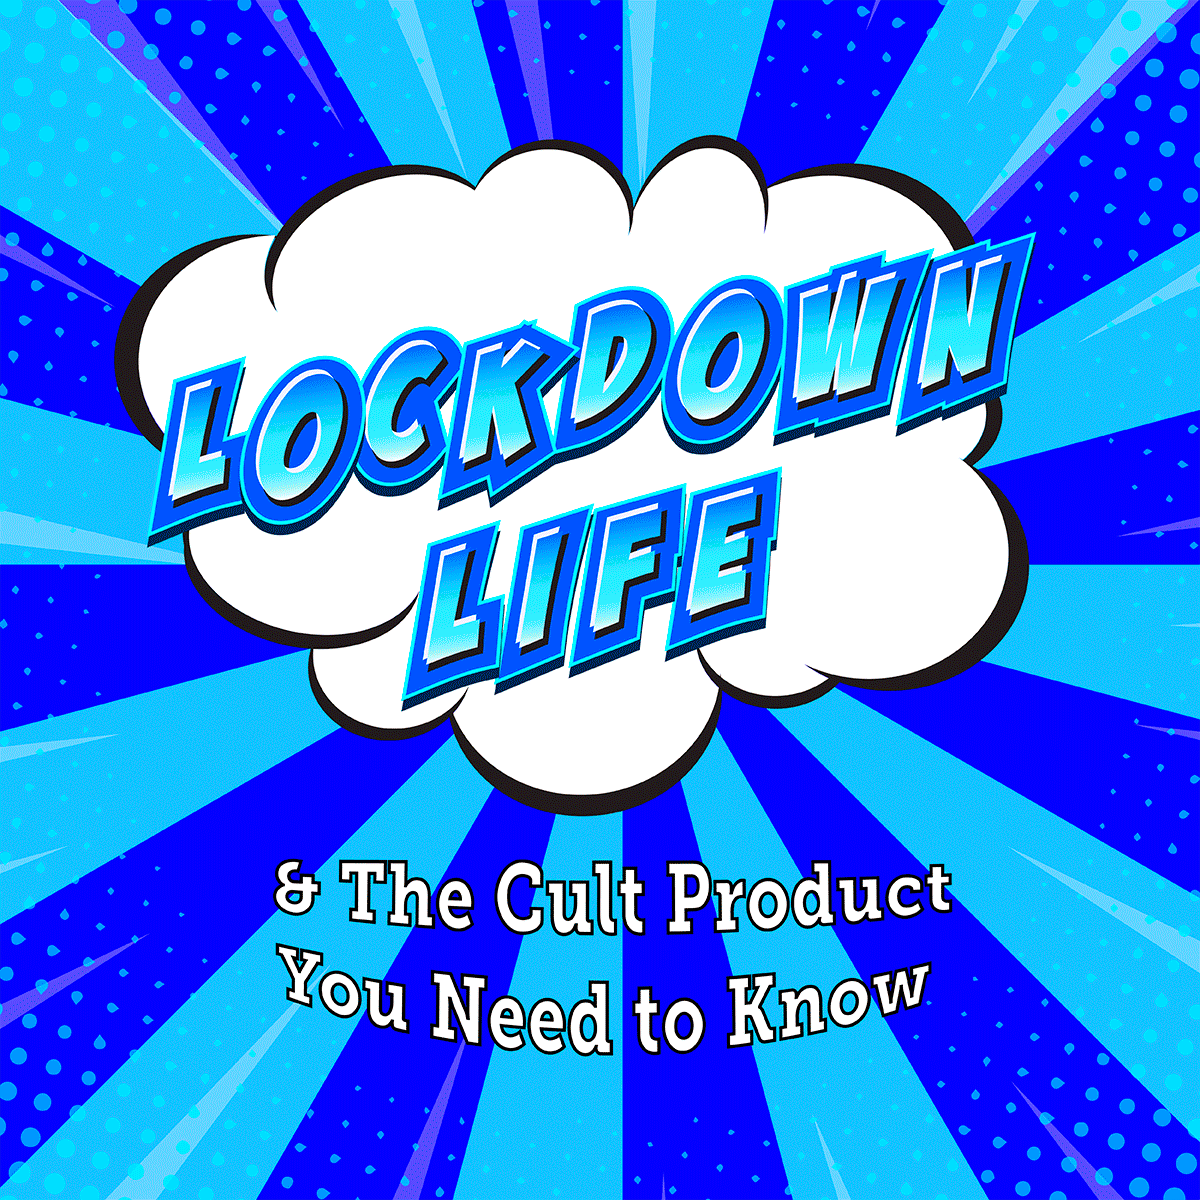 Lockdown Life & The Cult Product You Need to Know